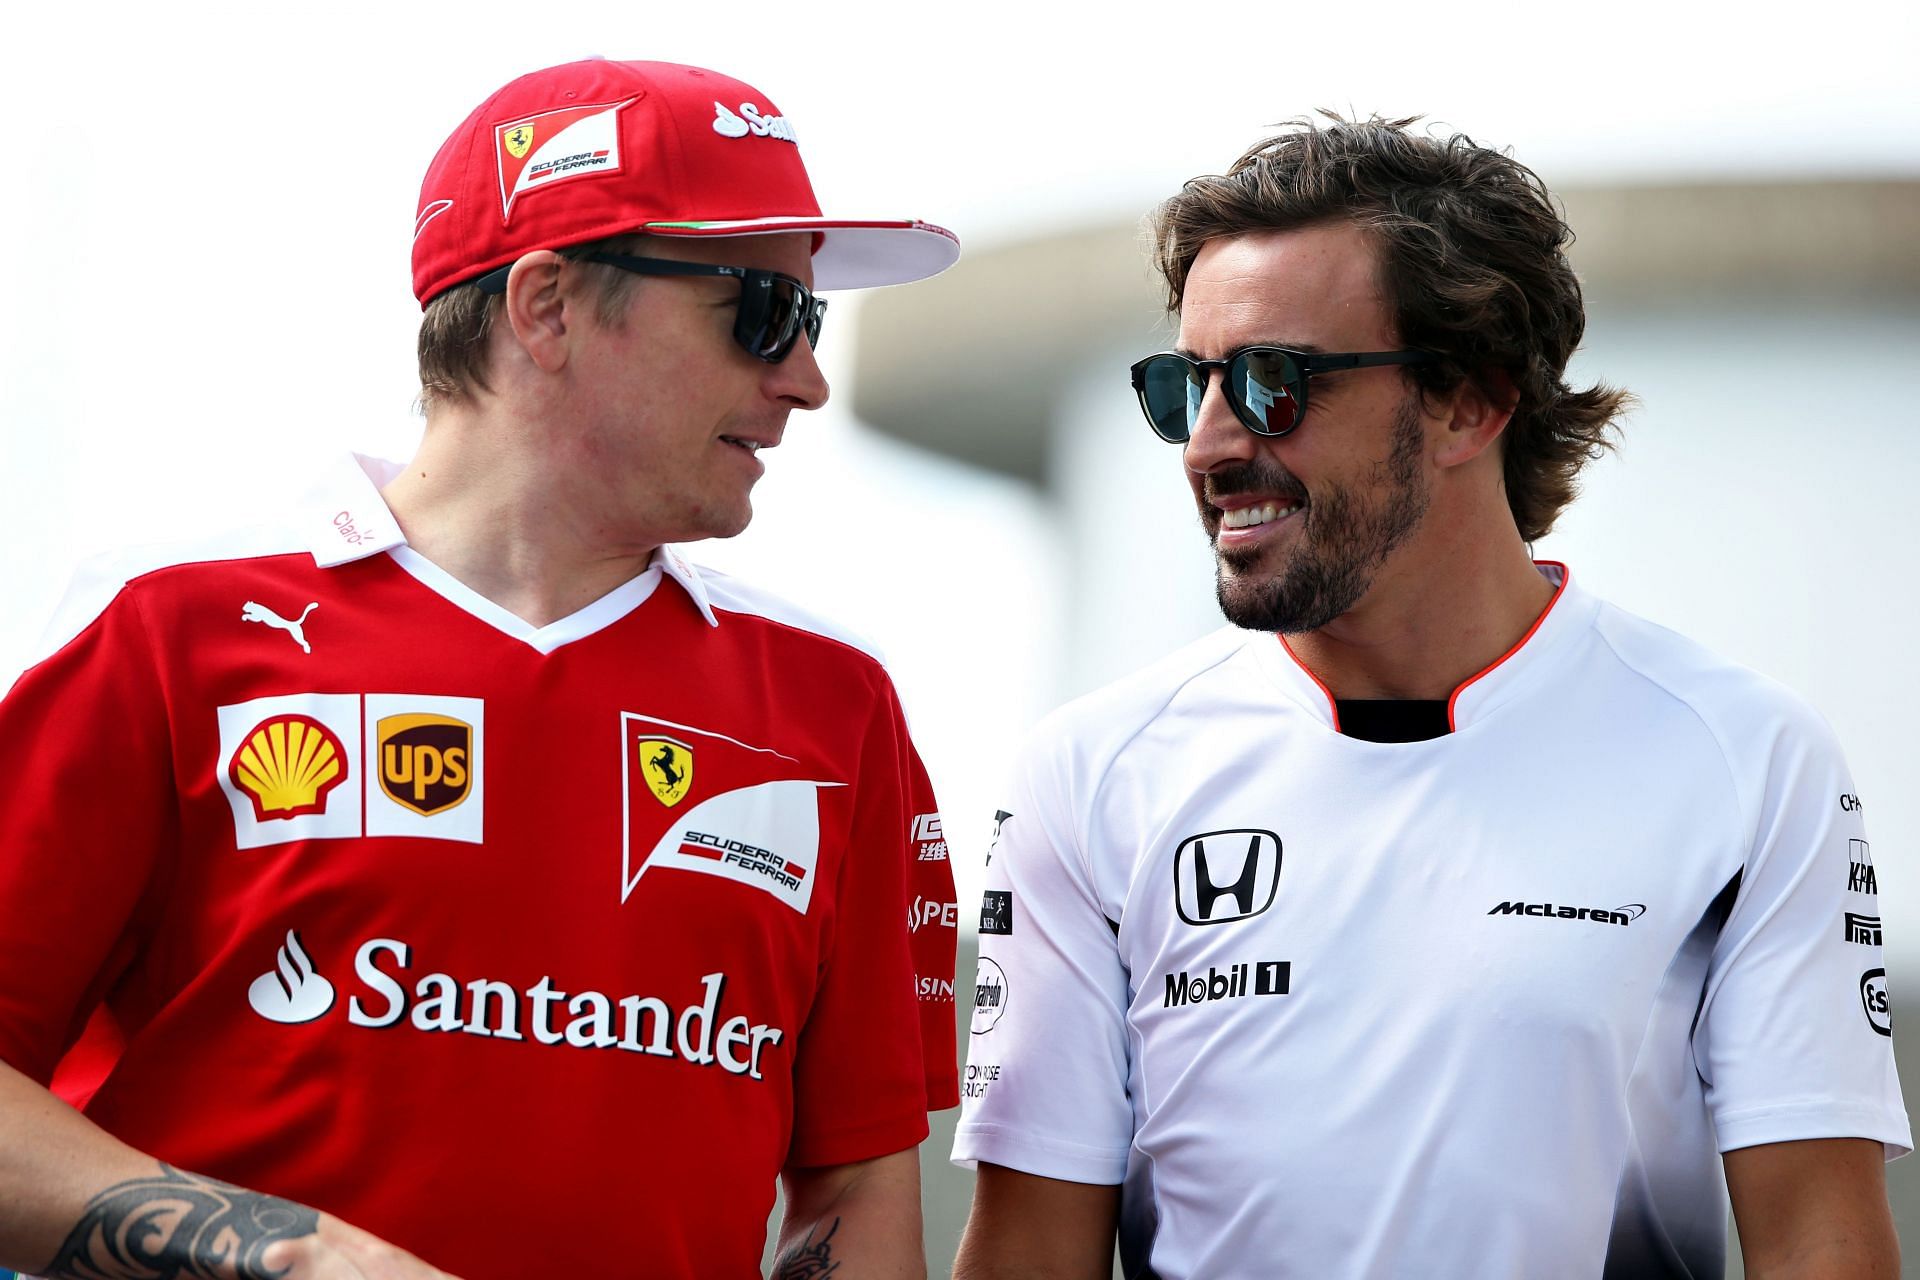 Alonso expressed happiness at having shared so many years with Raikkonen